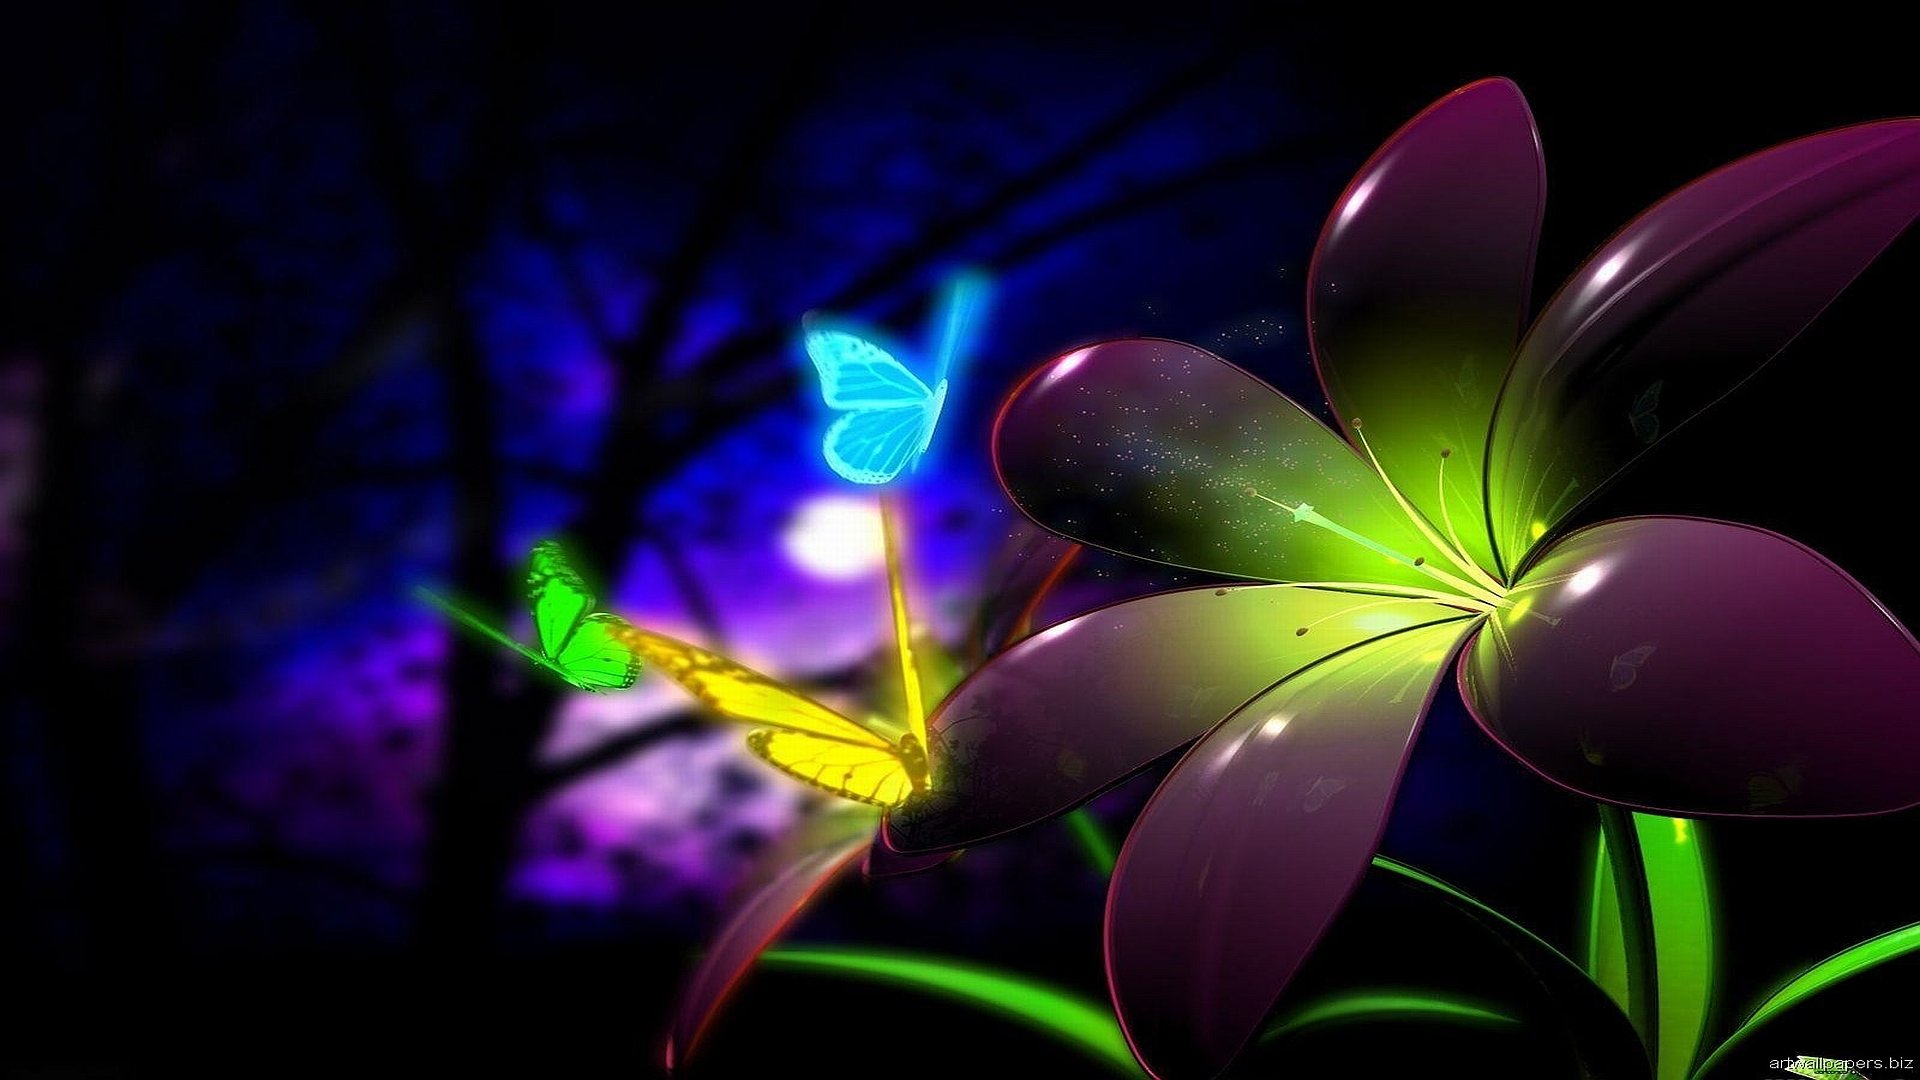 Download Hd Cool Nature Desktop Wallpaper Id - Animation Flowers Images Download - HD Wallpaper 